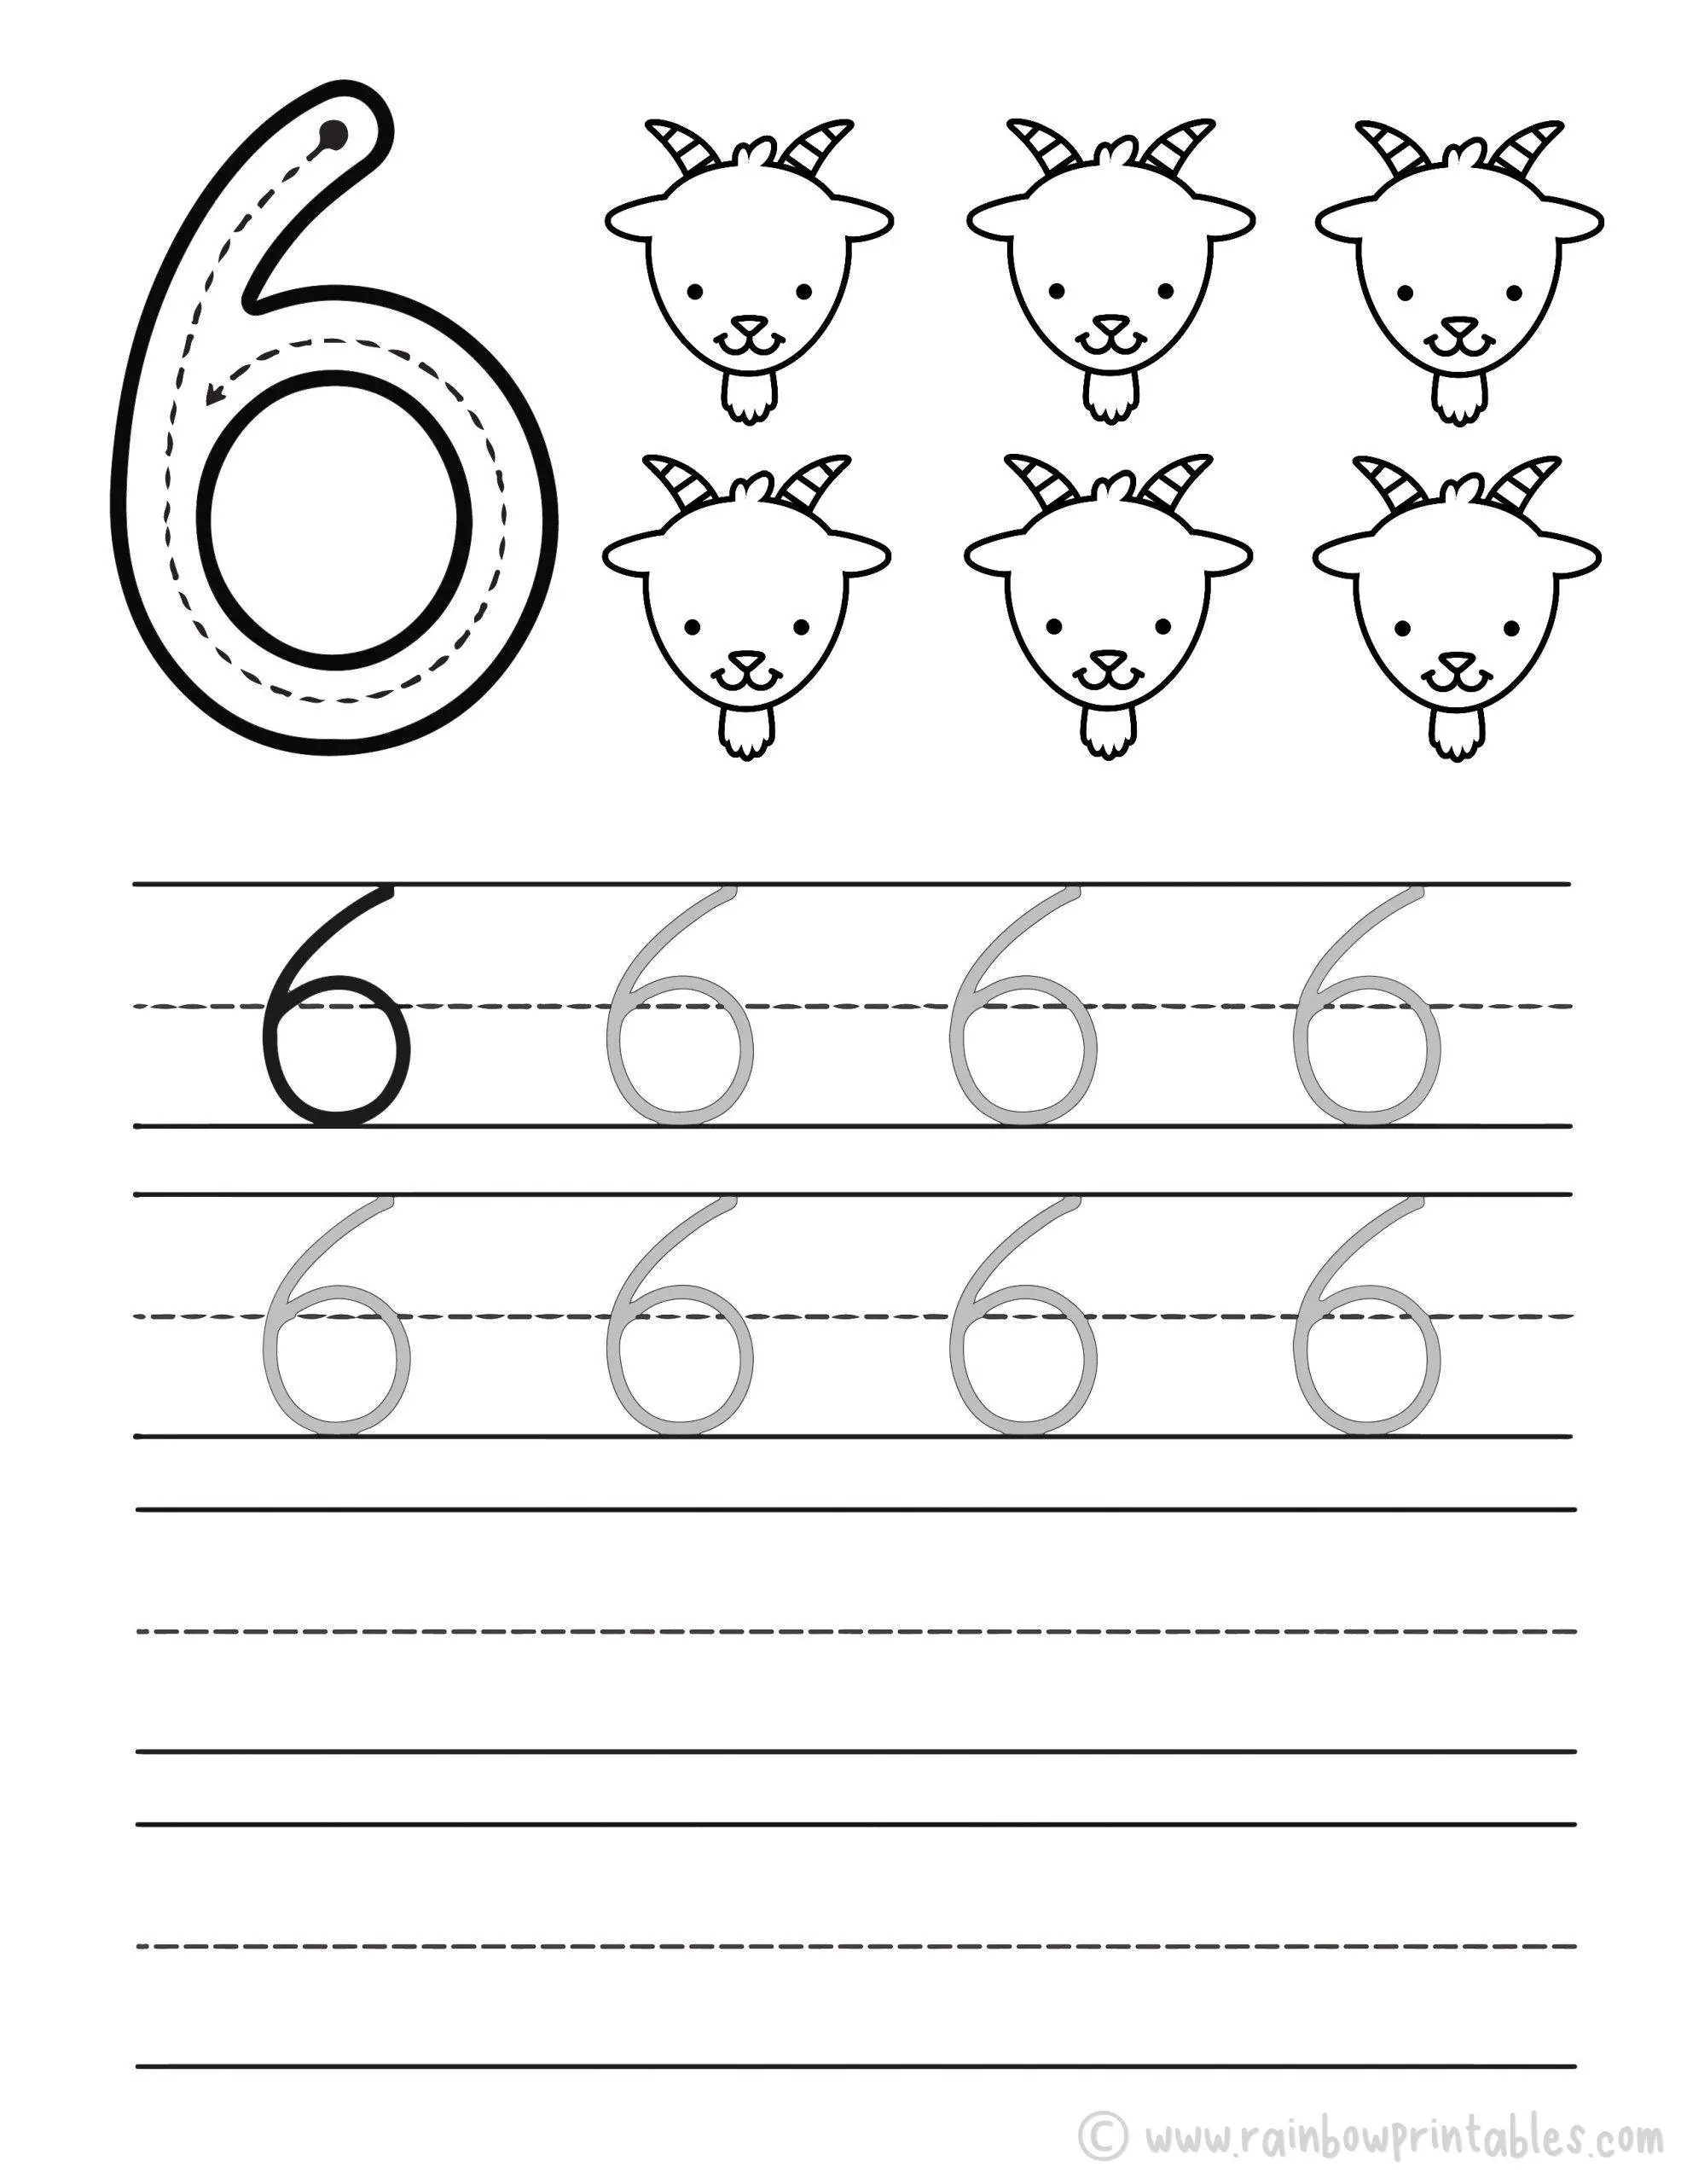 Trace Numbers Worksheet-06-SIX